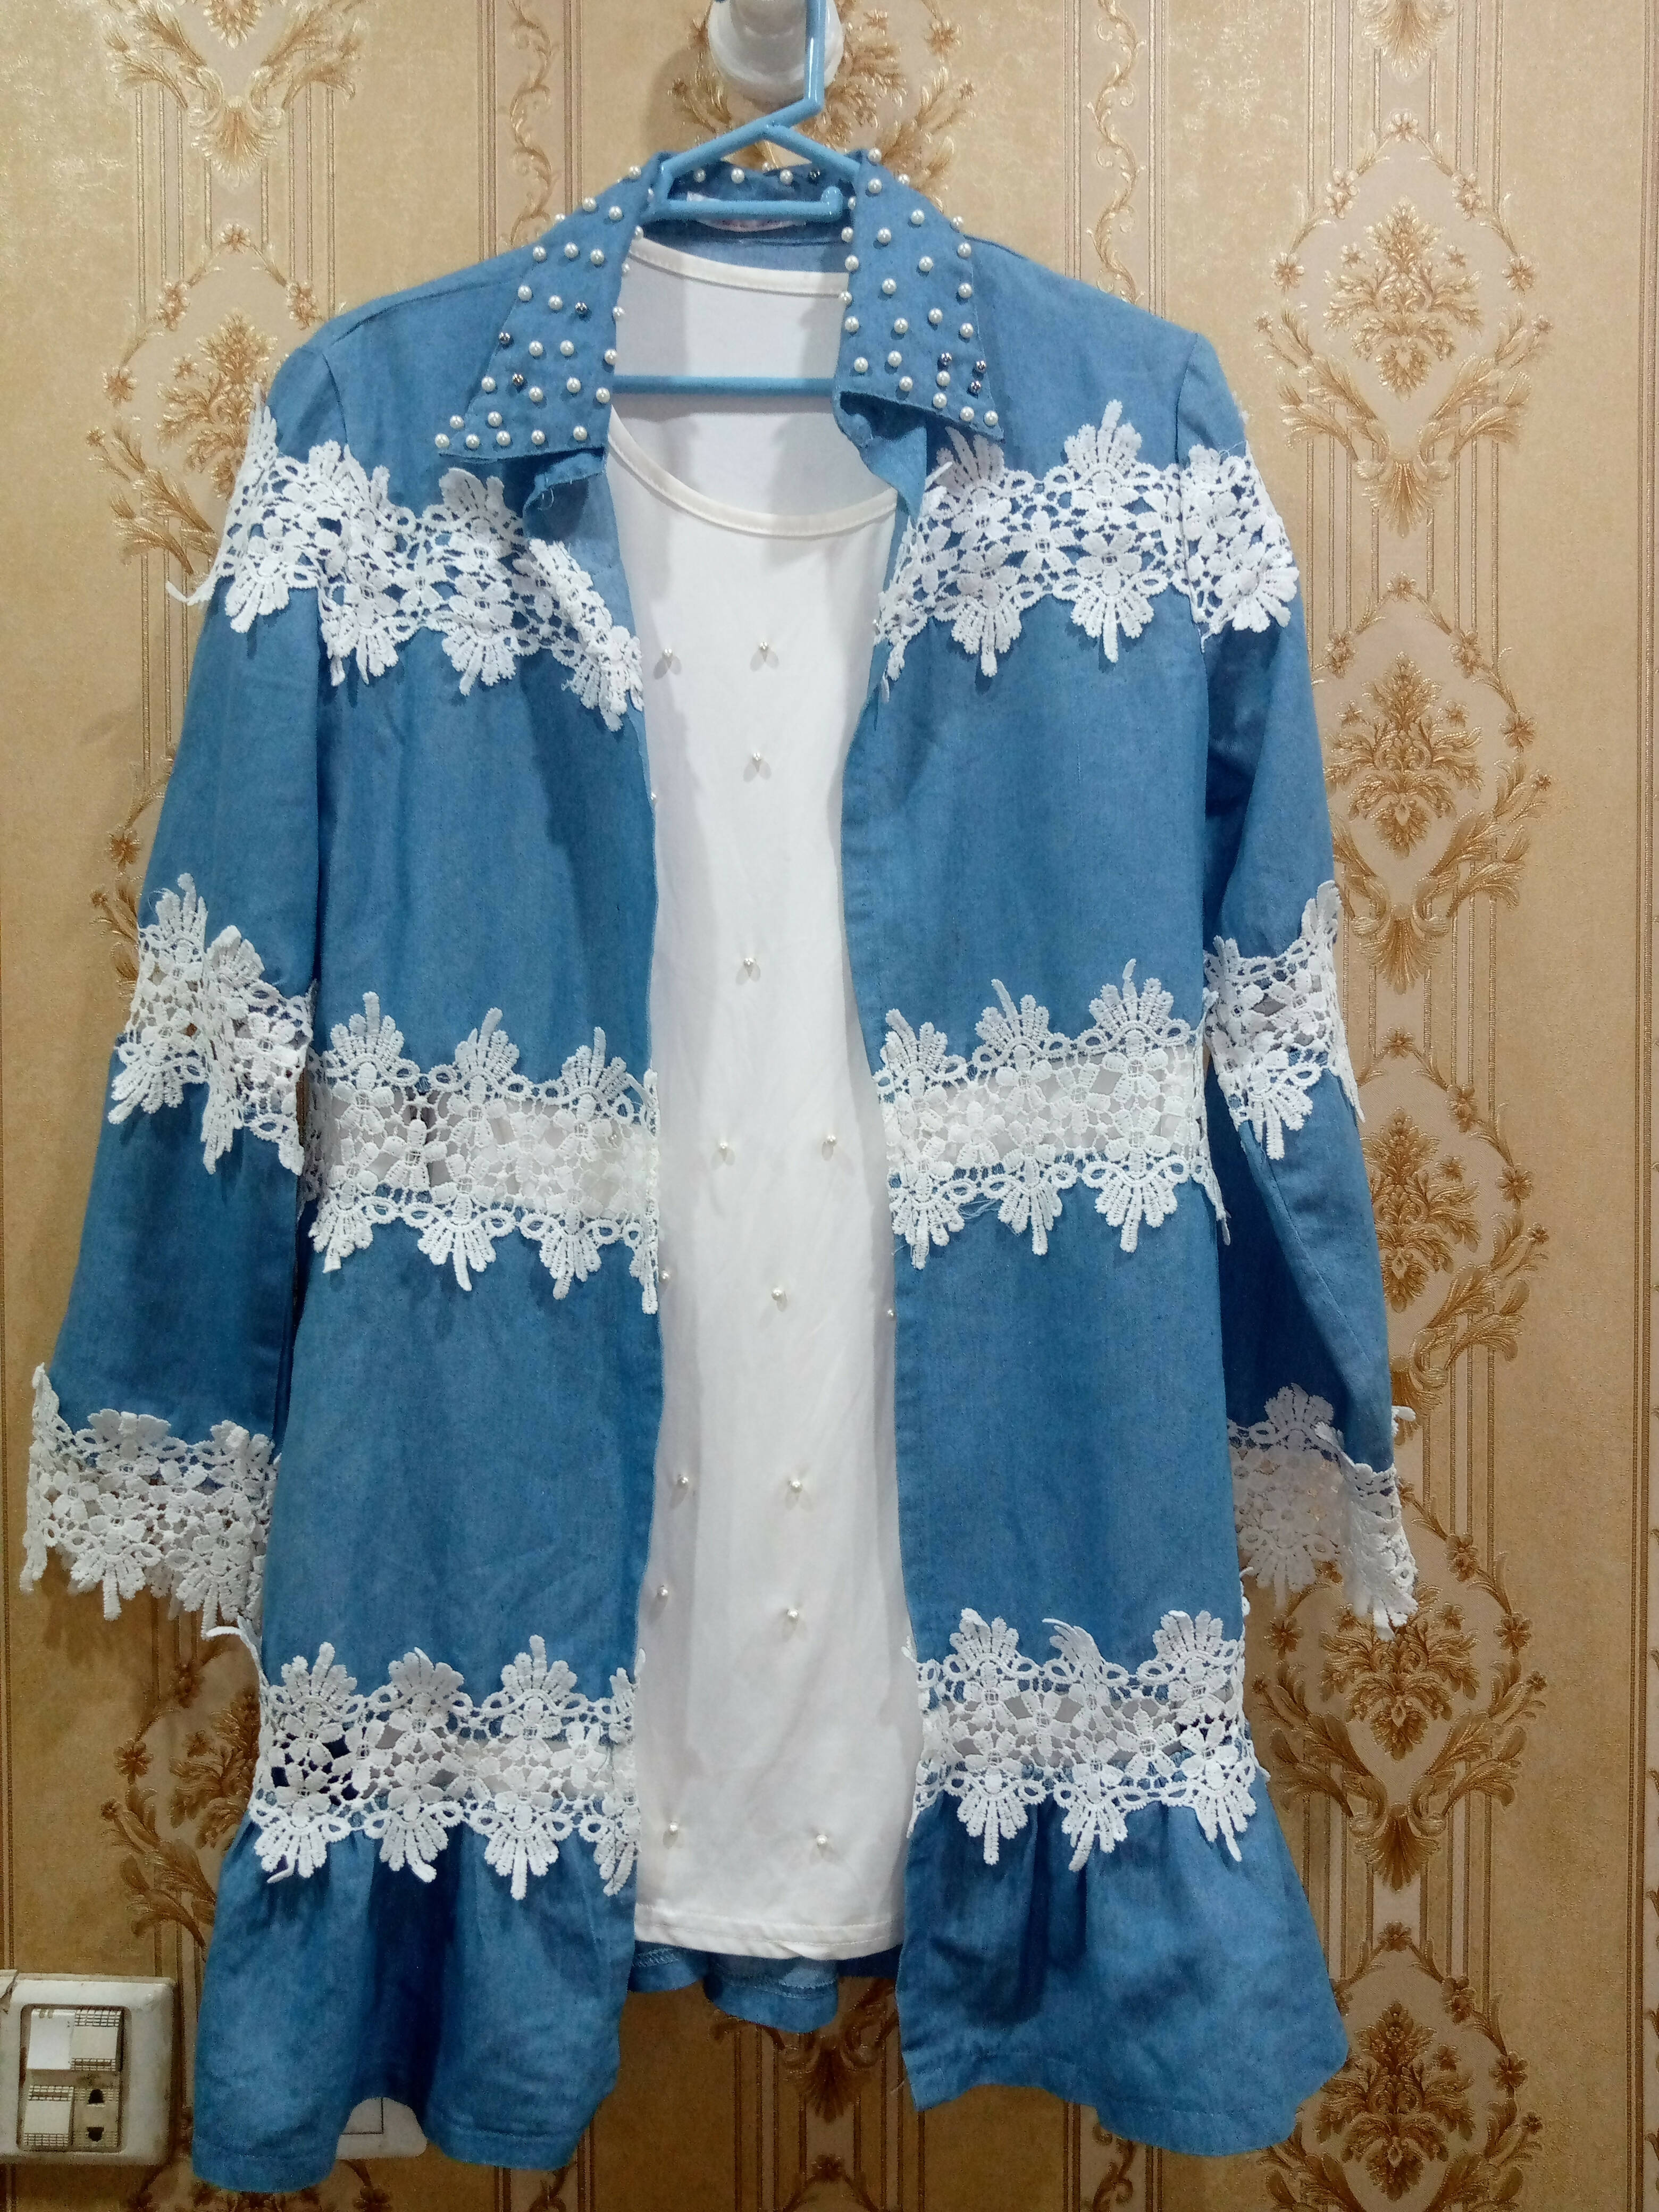 Beautiful Fancy Top with Laces and Pearls (Size: S ) | Women Tops & Shirts | Worn Once